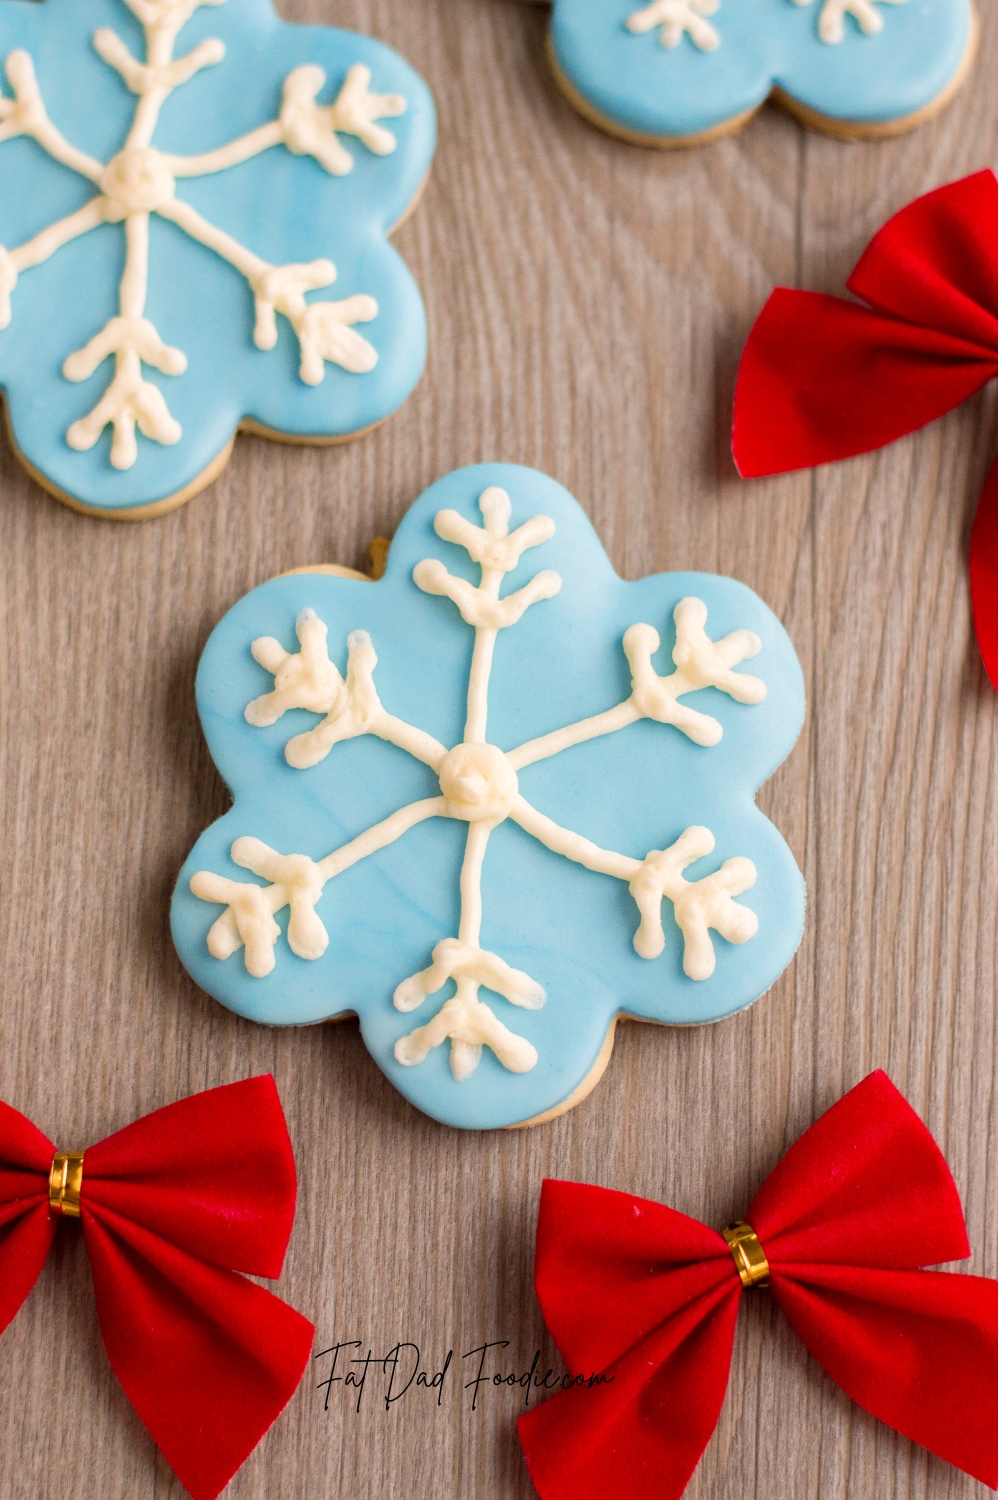 snowflake cookie recipe on wood with bows